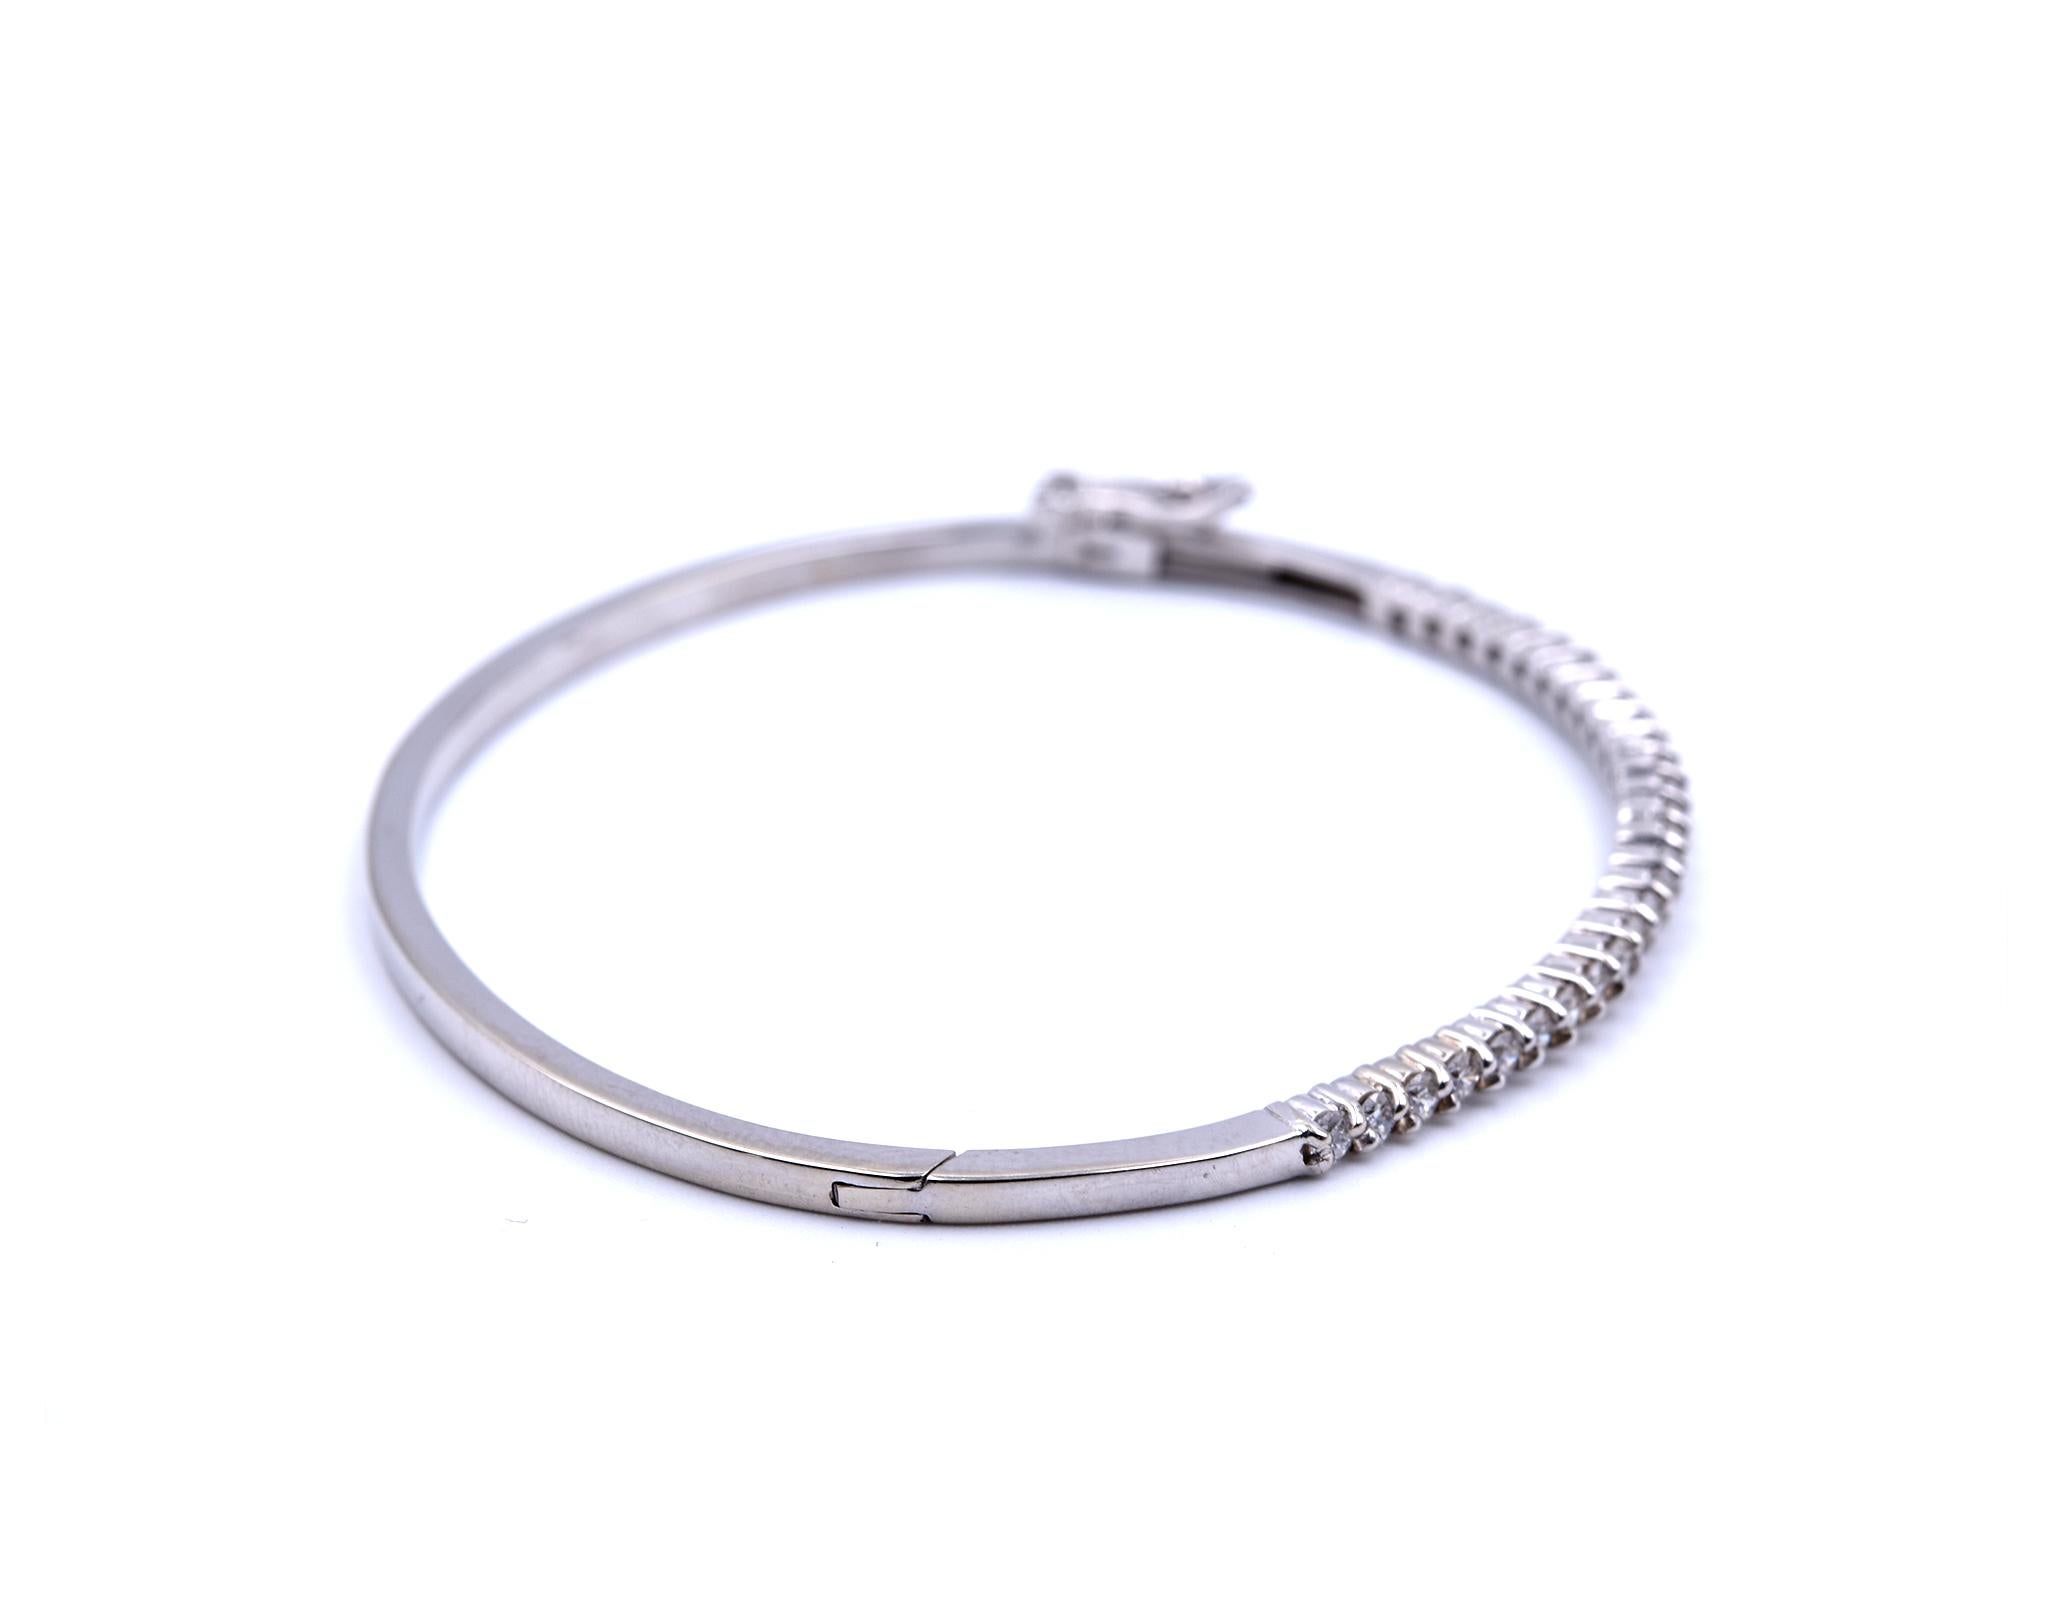 Designer: custom
Material: 14k white gold
Diamond: 27 round brilliant cut = 1.37cttw
Color: G
Clarity: SI1
Dimensions: bracelet will fit a 7-inch wrist and it is 2.30mm wide
Weight: 10.15 grams
